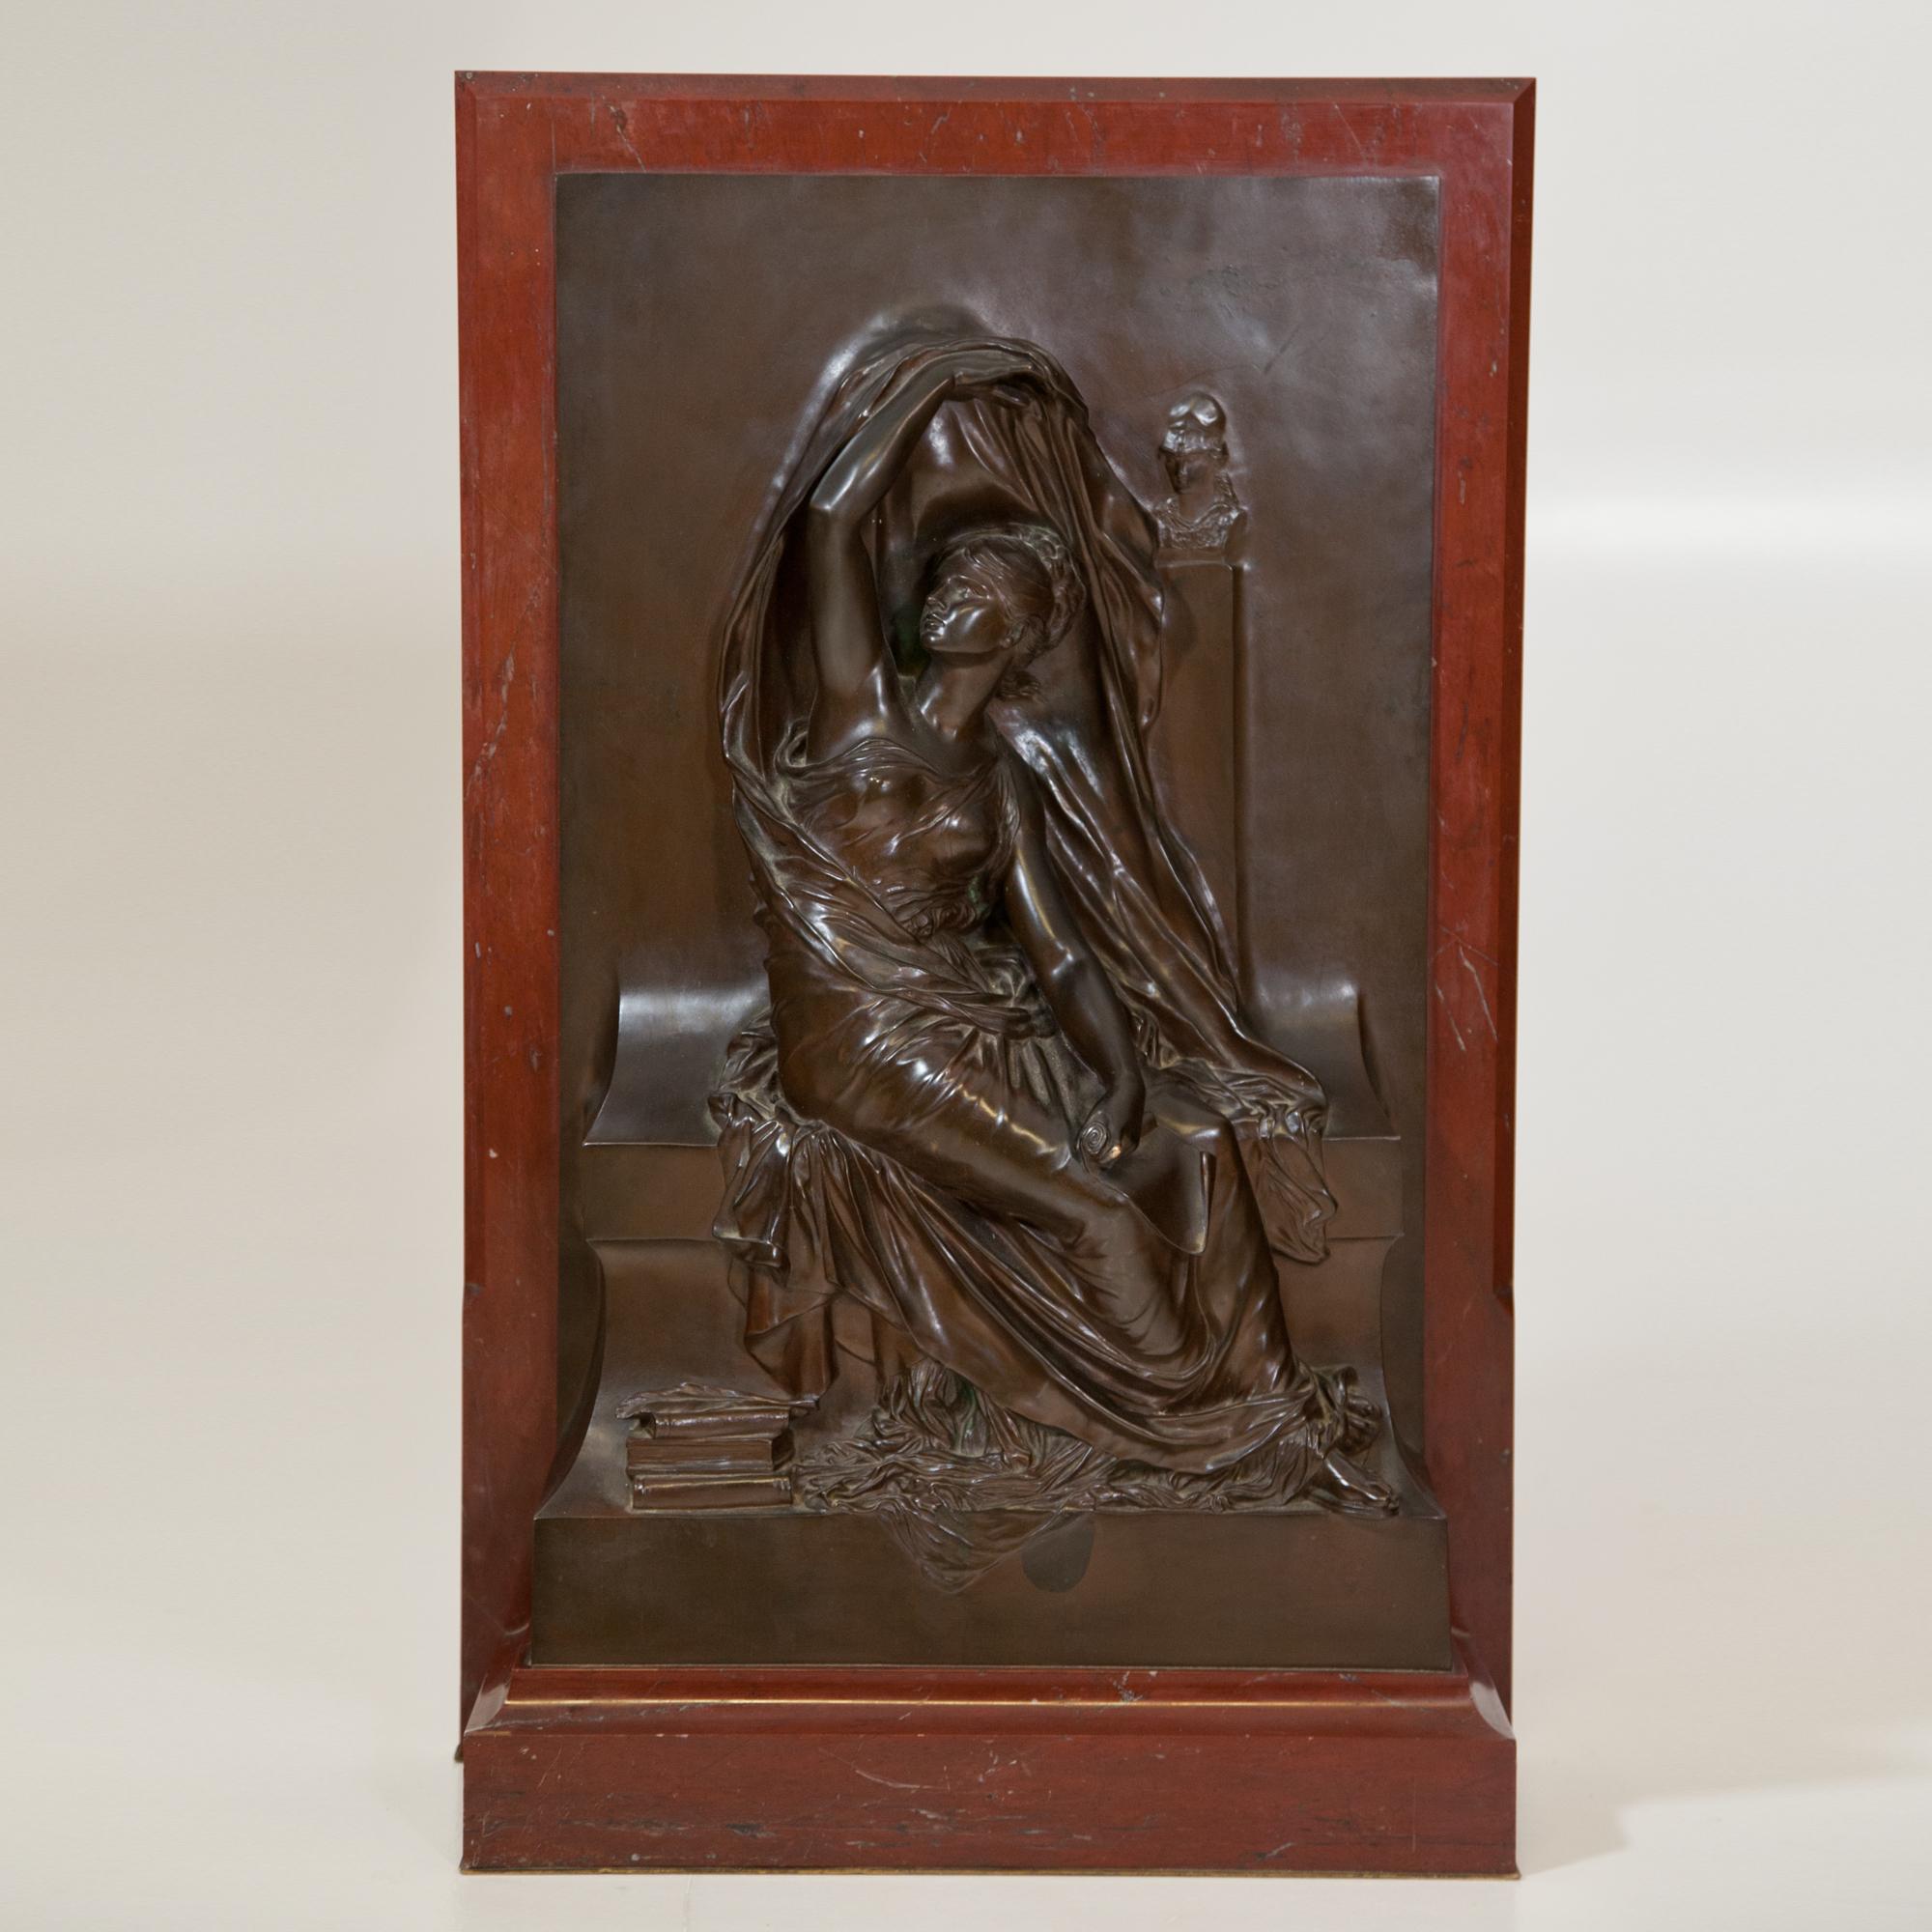 Bronze relief on red marble, signed H. Chapu and foundry stamp of Thiébaut Frères Fondeurs at the side. Depiction of a sitting young lady with a bust of Athena in the background.